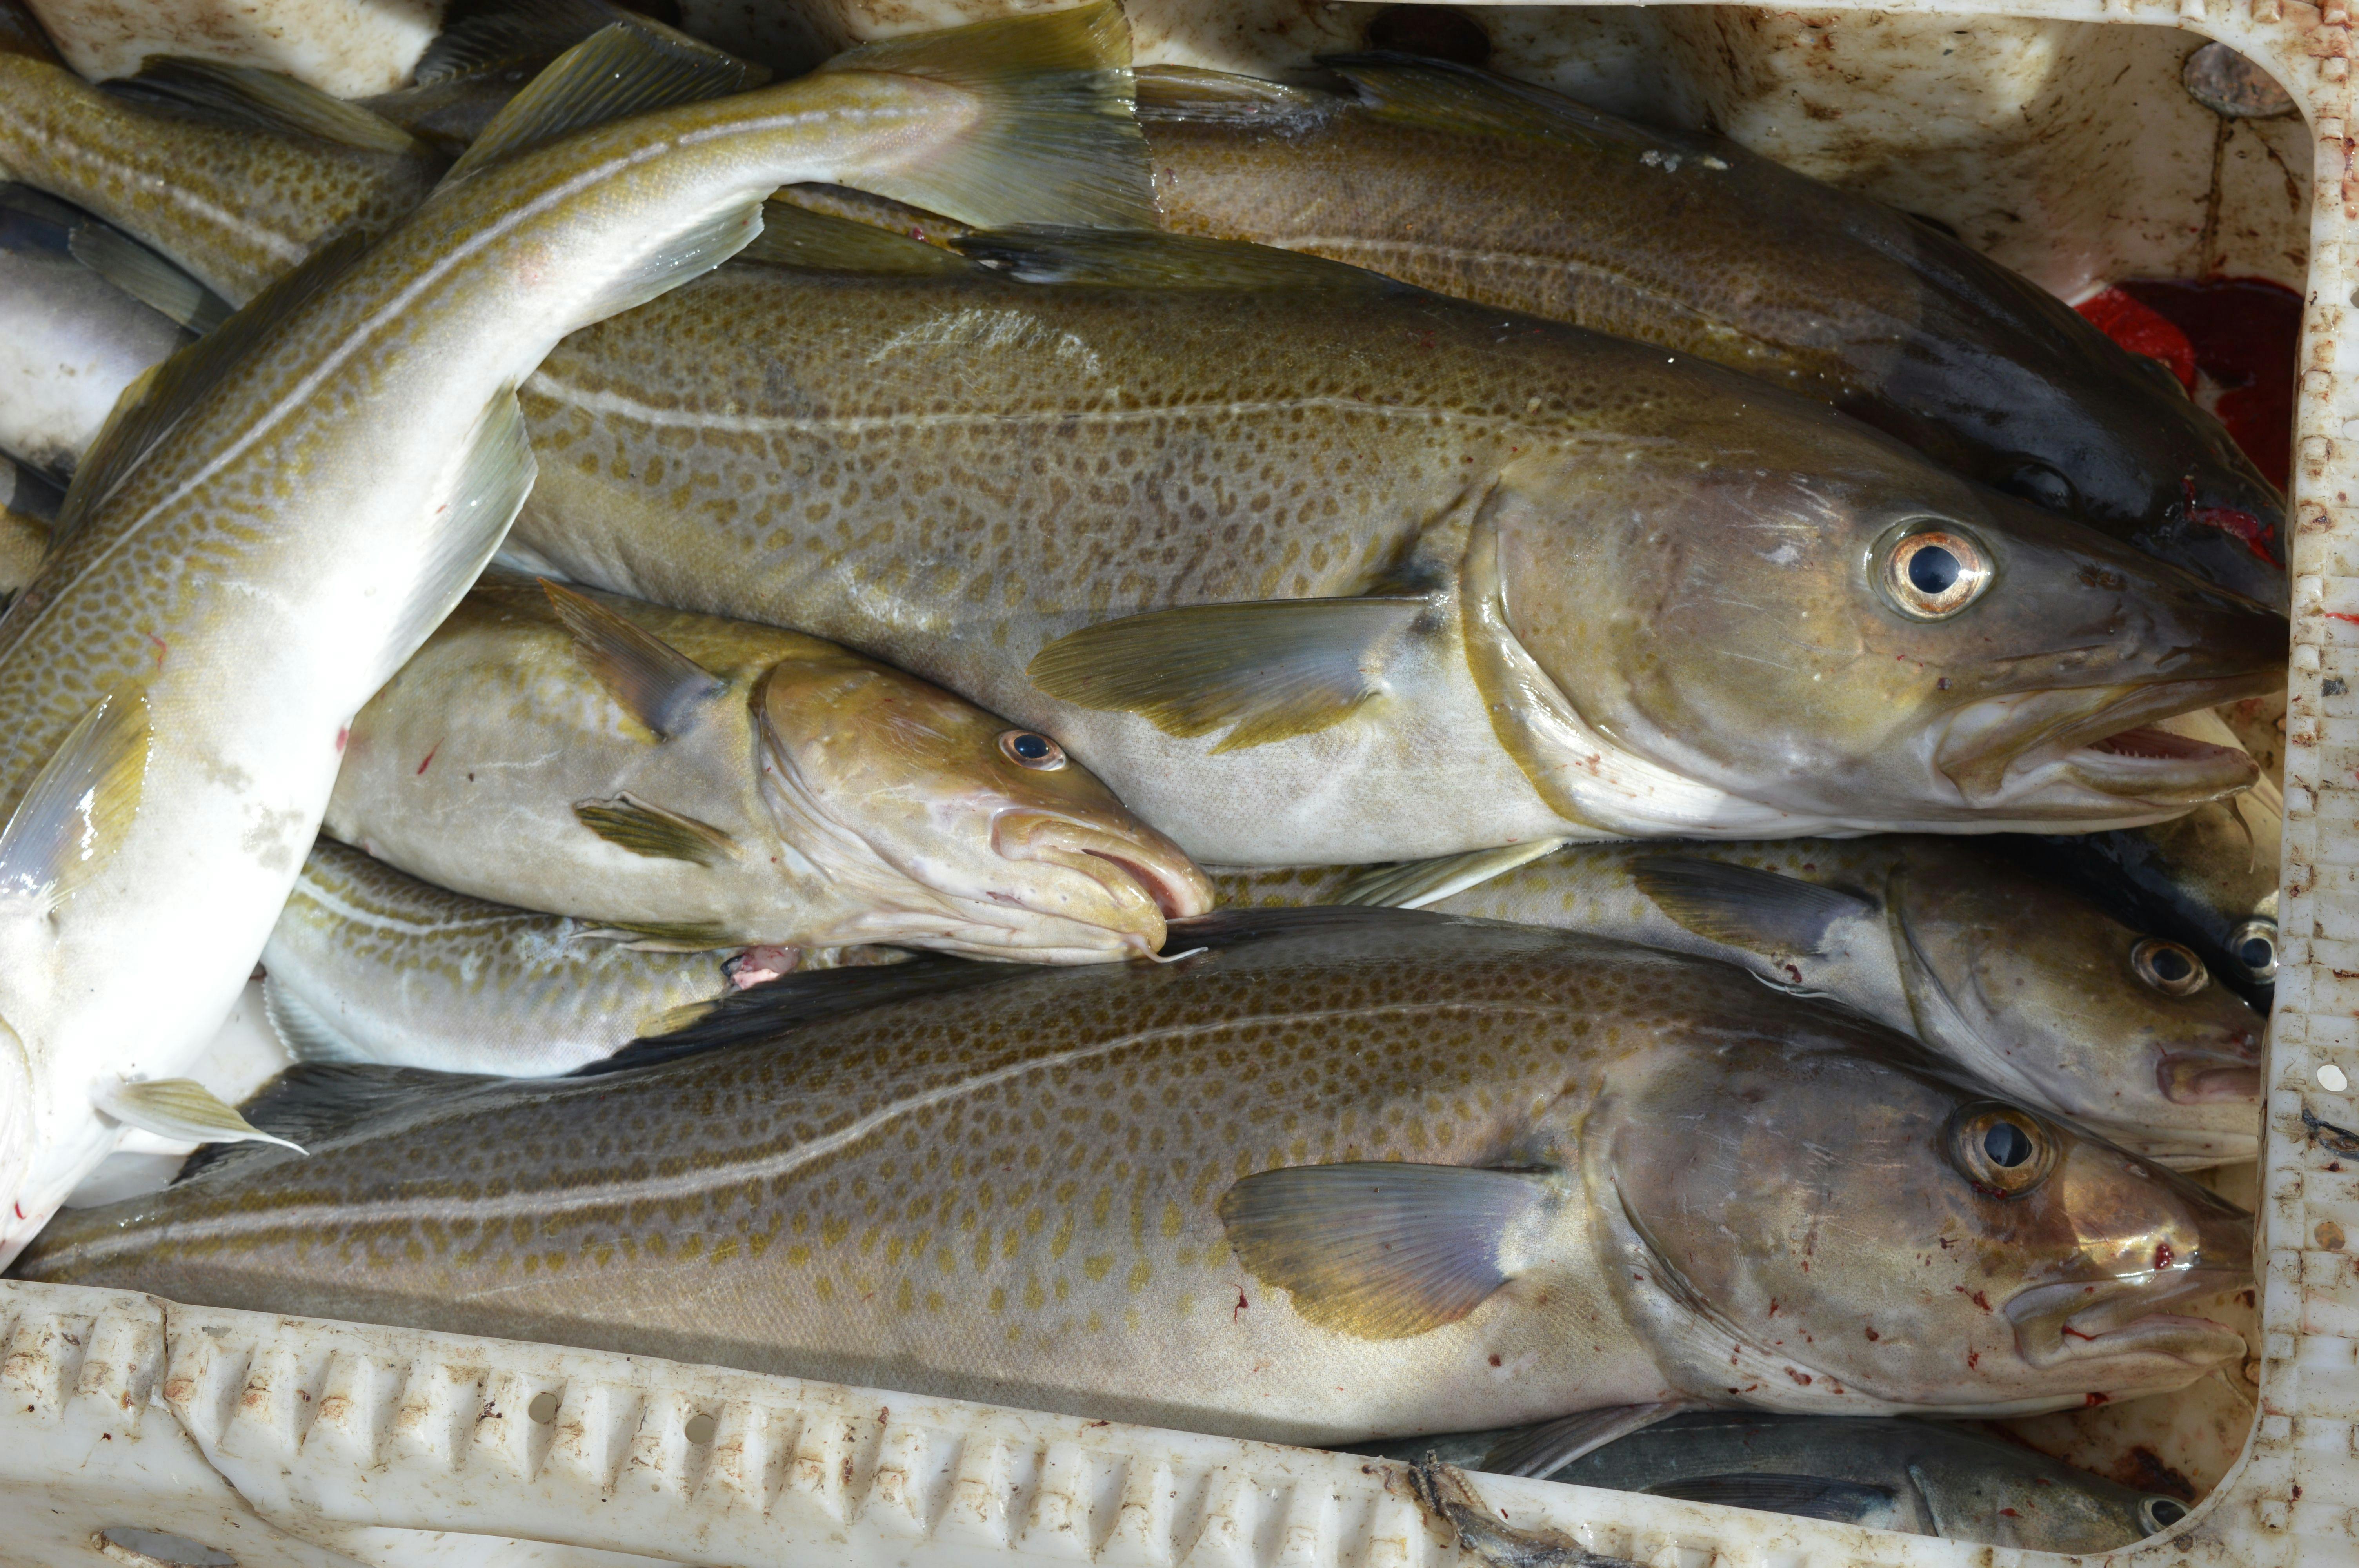 Close-up of Fish in Market